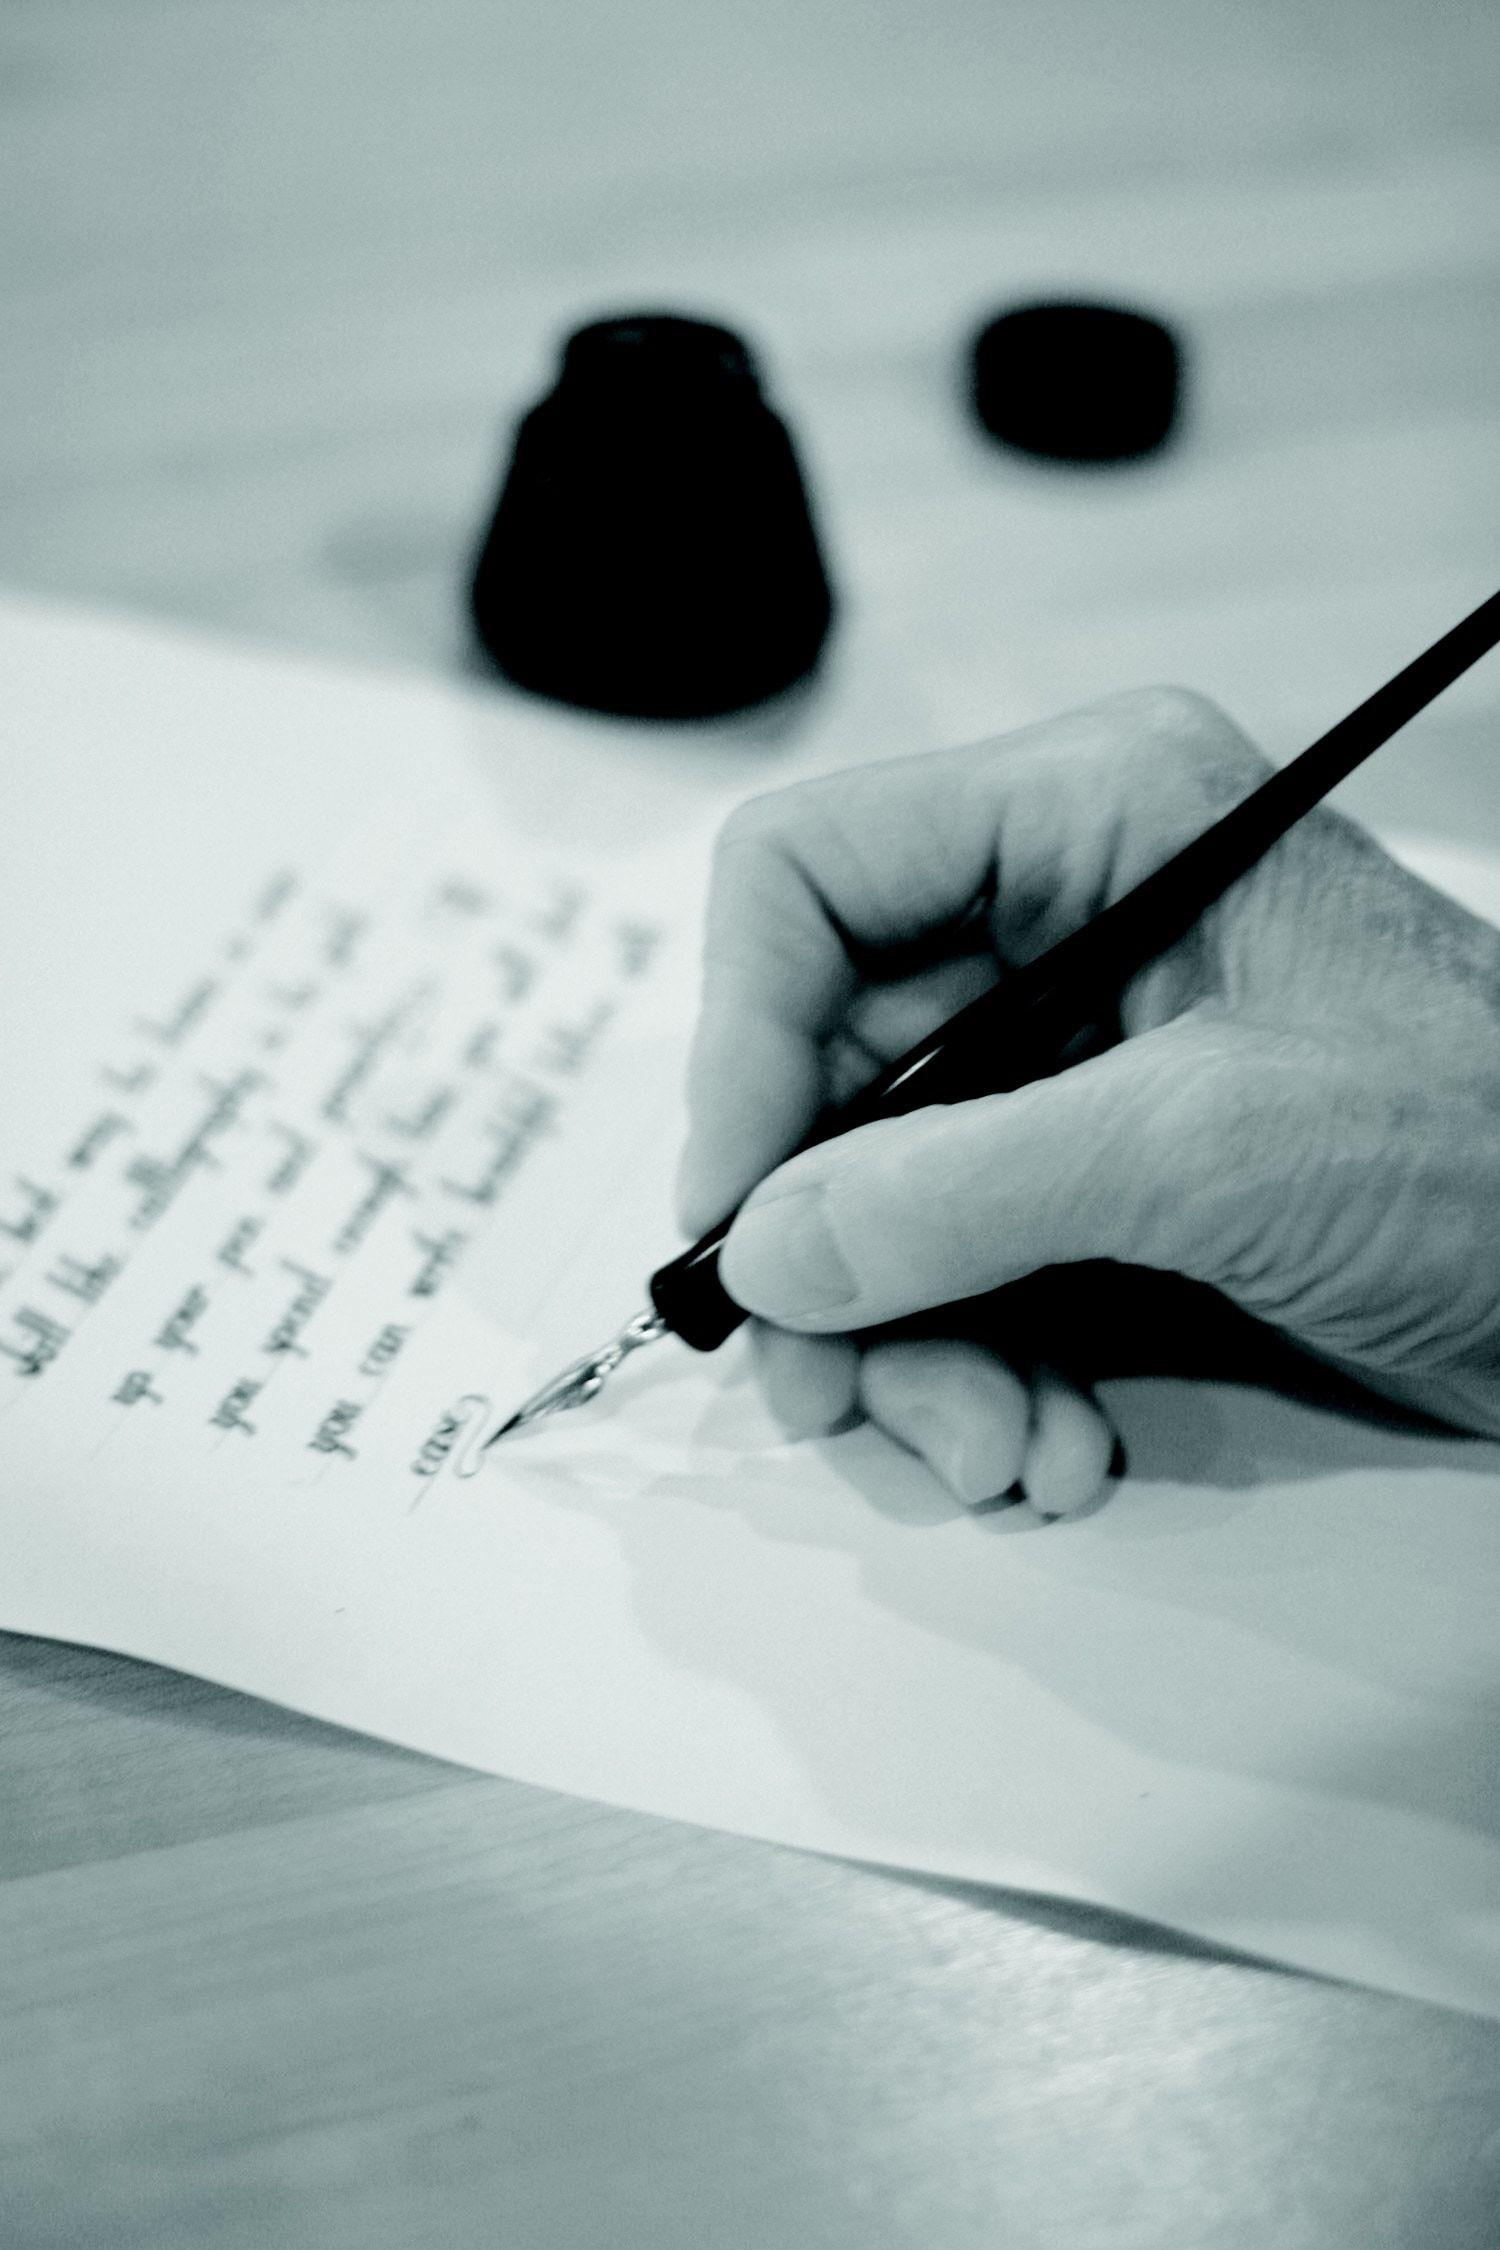 hand writing letter using fountain pen photo free image